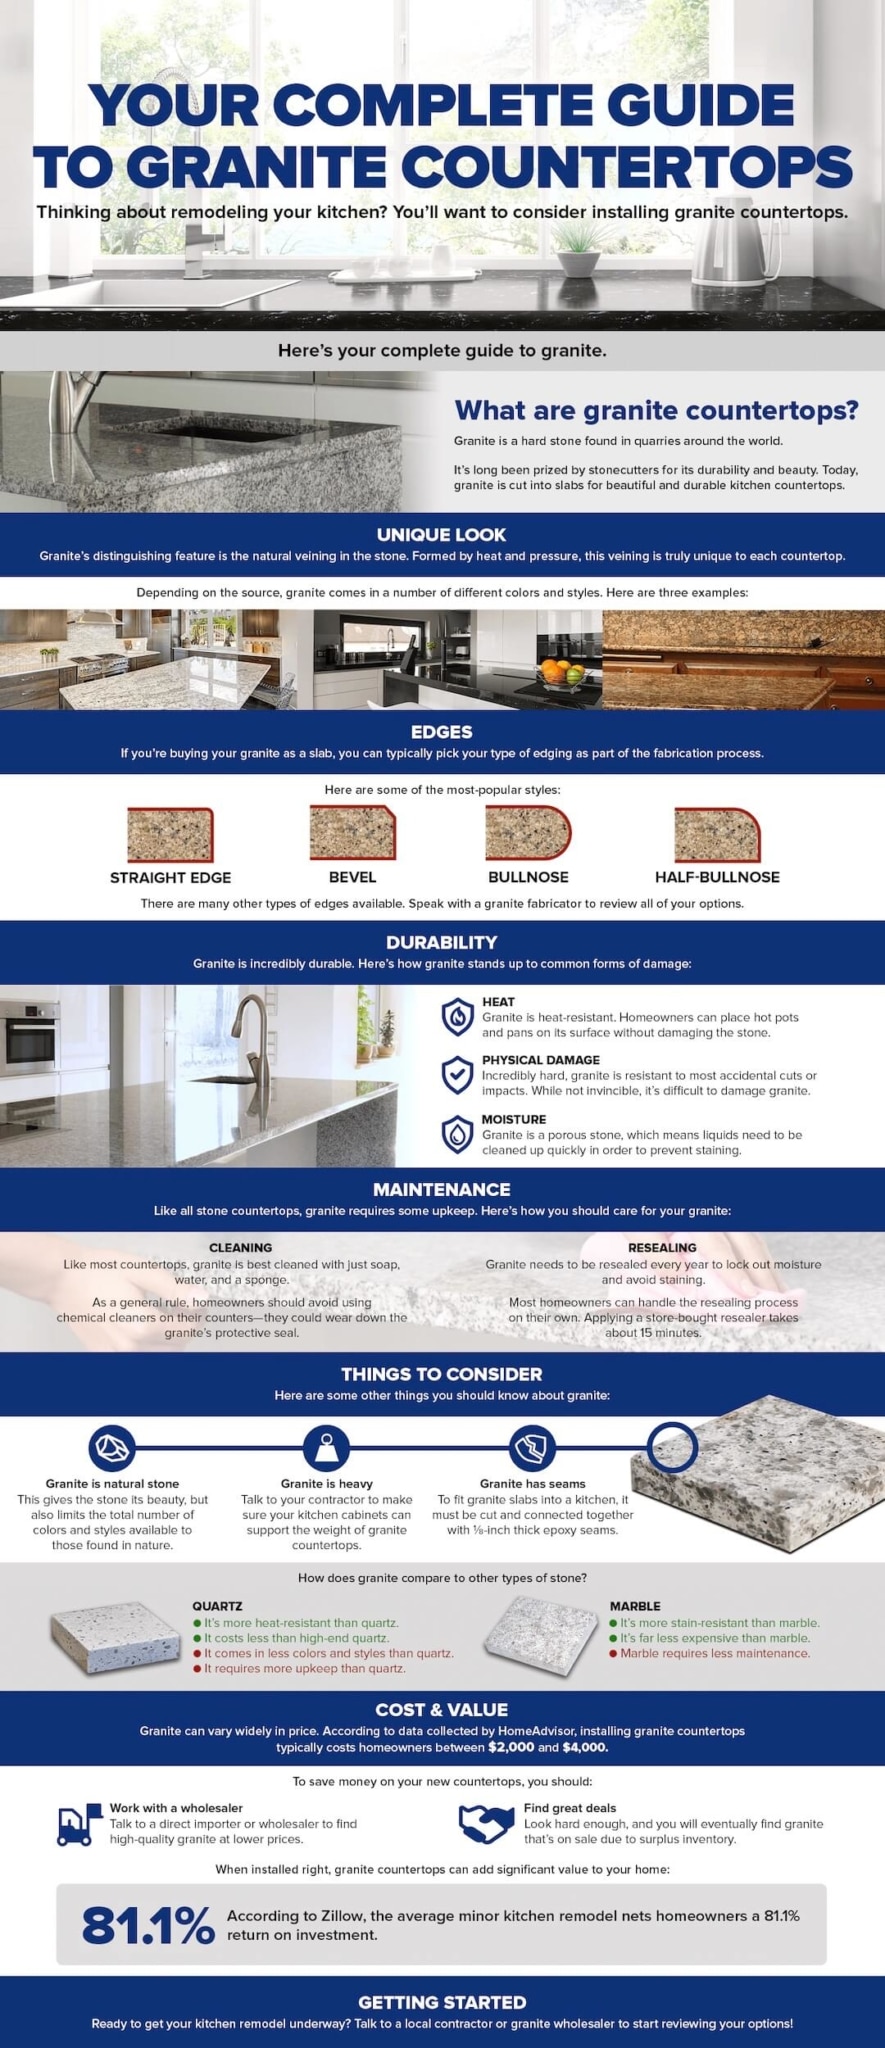 This infographic details everything homeowners need to know about granite countertops, from their cost to available colors.